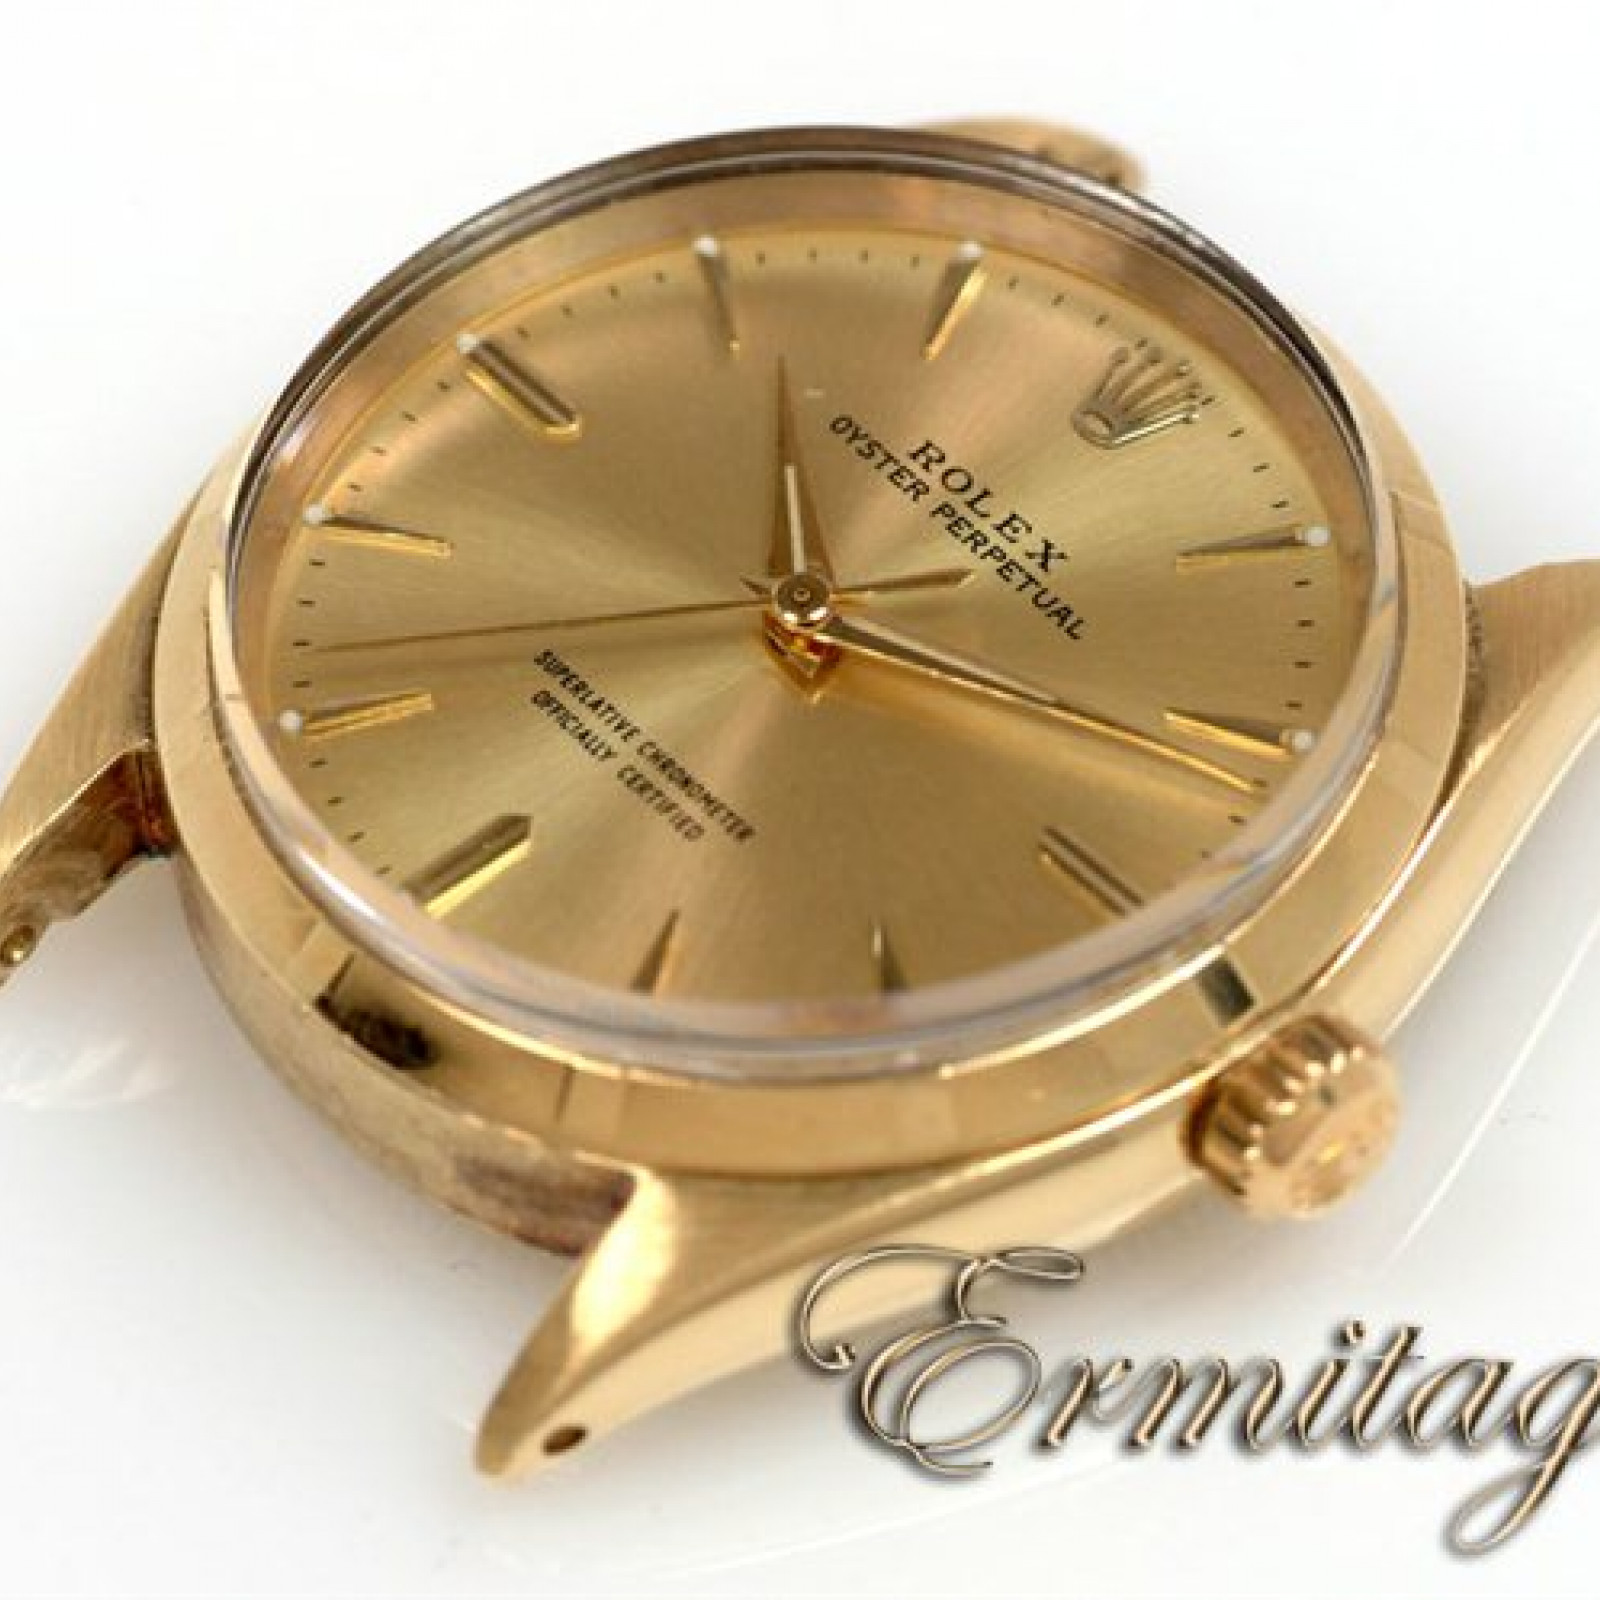 Rolex Oyster Perpetual 1005 Gold